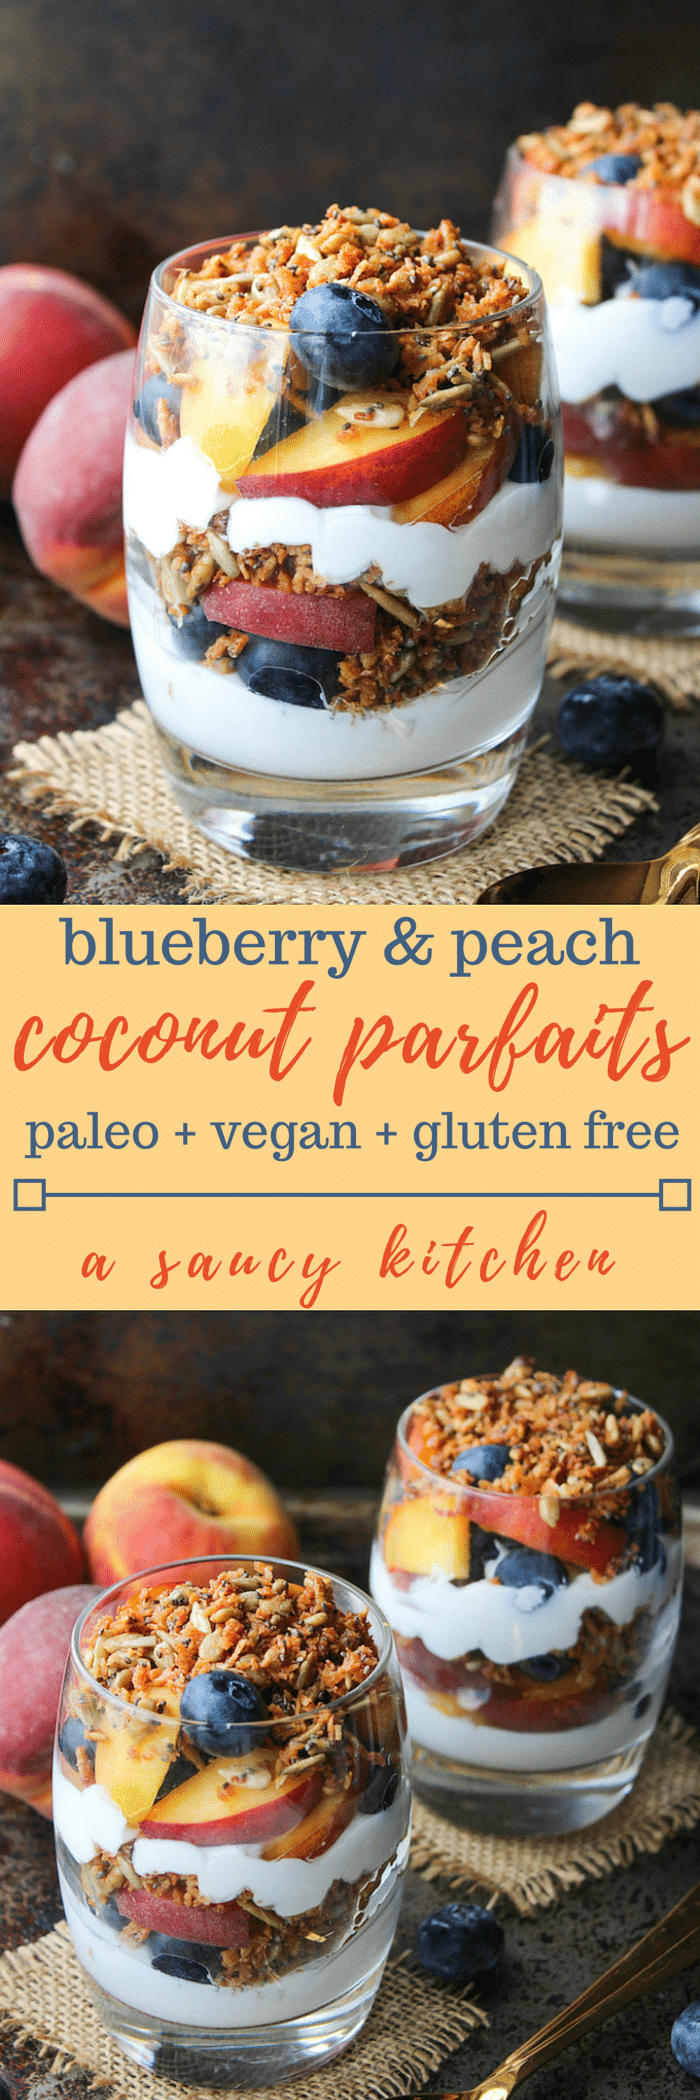 Blueberry & Peach Parfaits – filled with layers of coconut whipped cream, grain free cinnamon granola, and fresh summer fruit. Paleo & Vegan